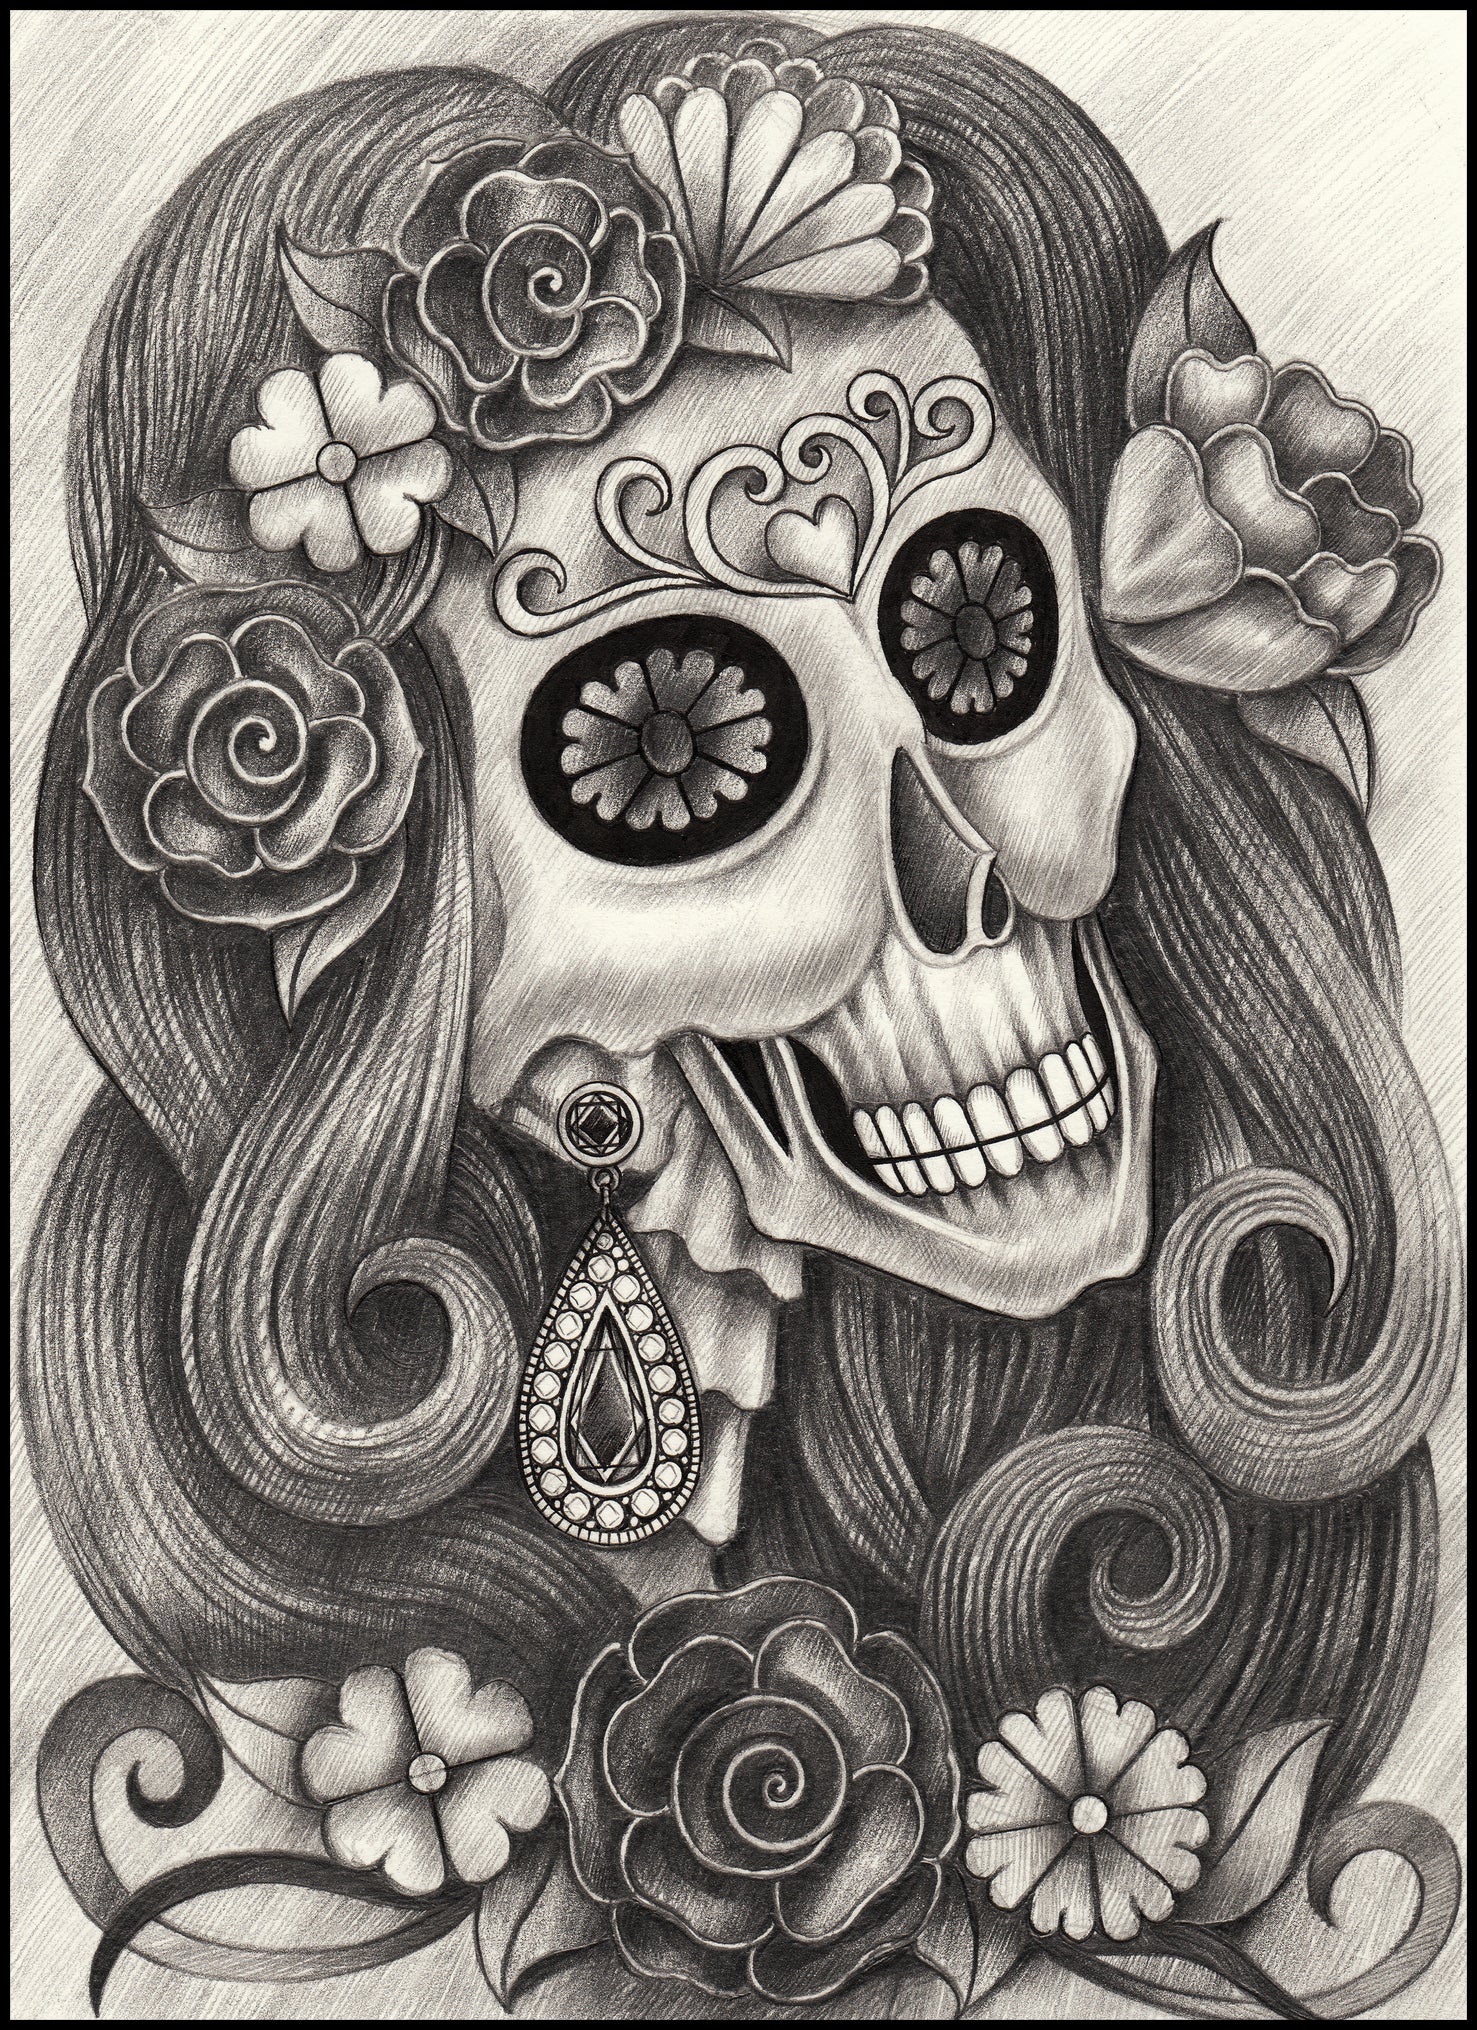 Pencil Sketch Woman Skeleton with Jewelry and Flowers Portrait #1 Vinyl Decal Sticker